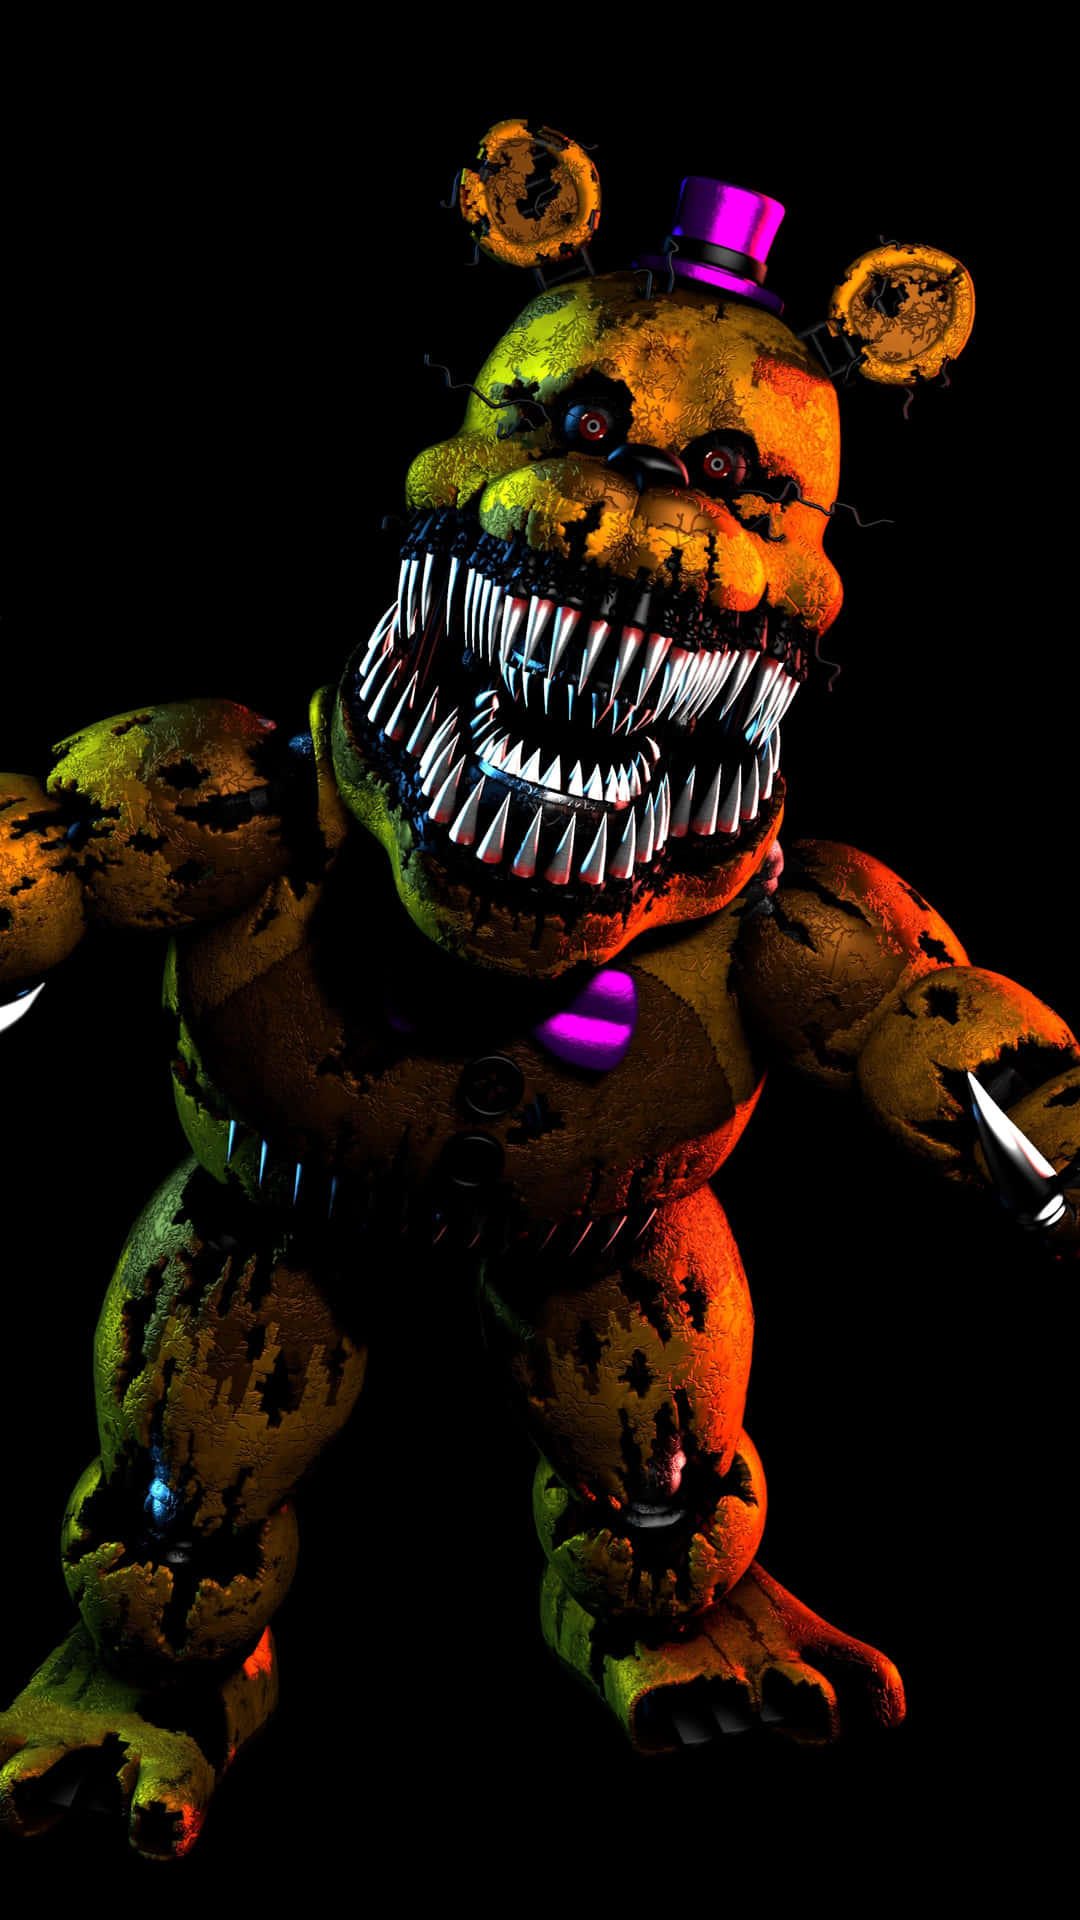 Five Nights At Freddys 4 Chica Wallpaper